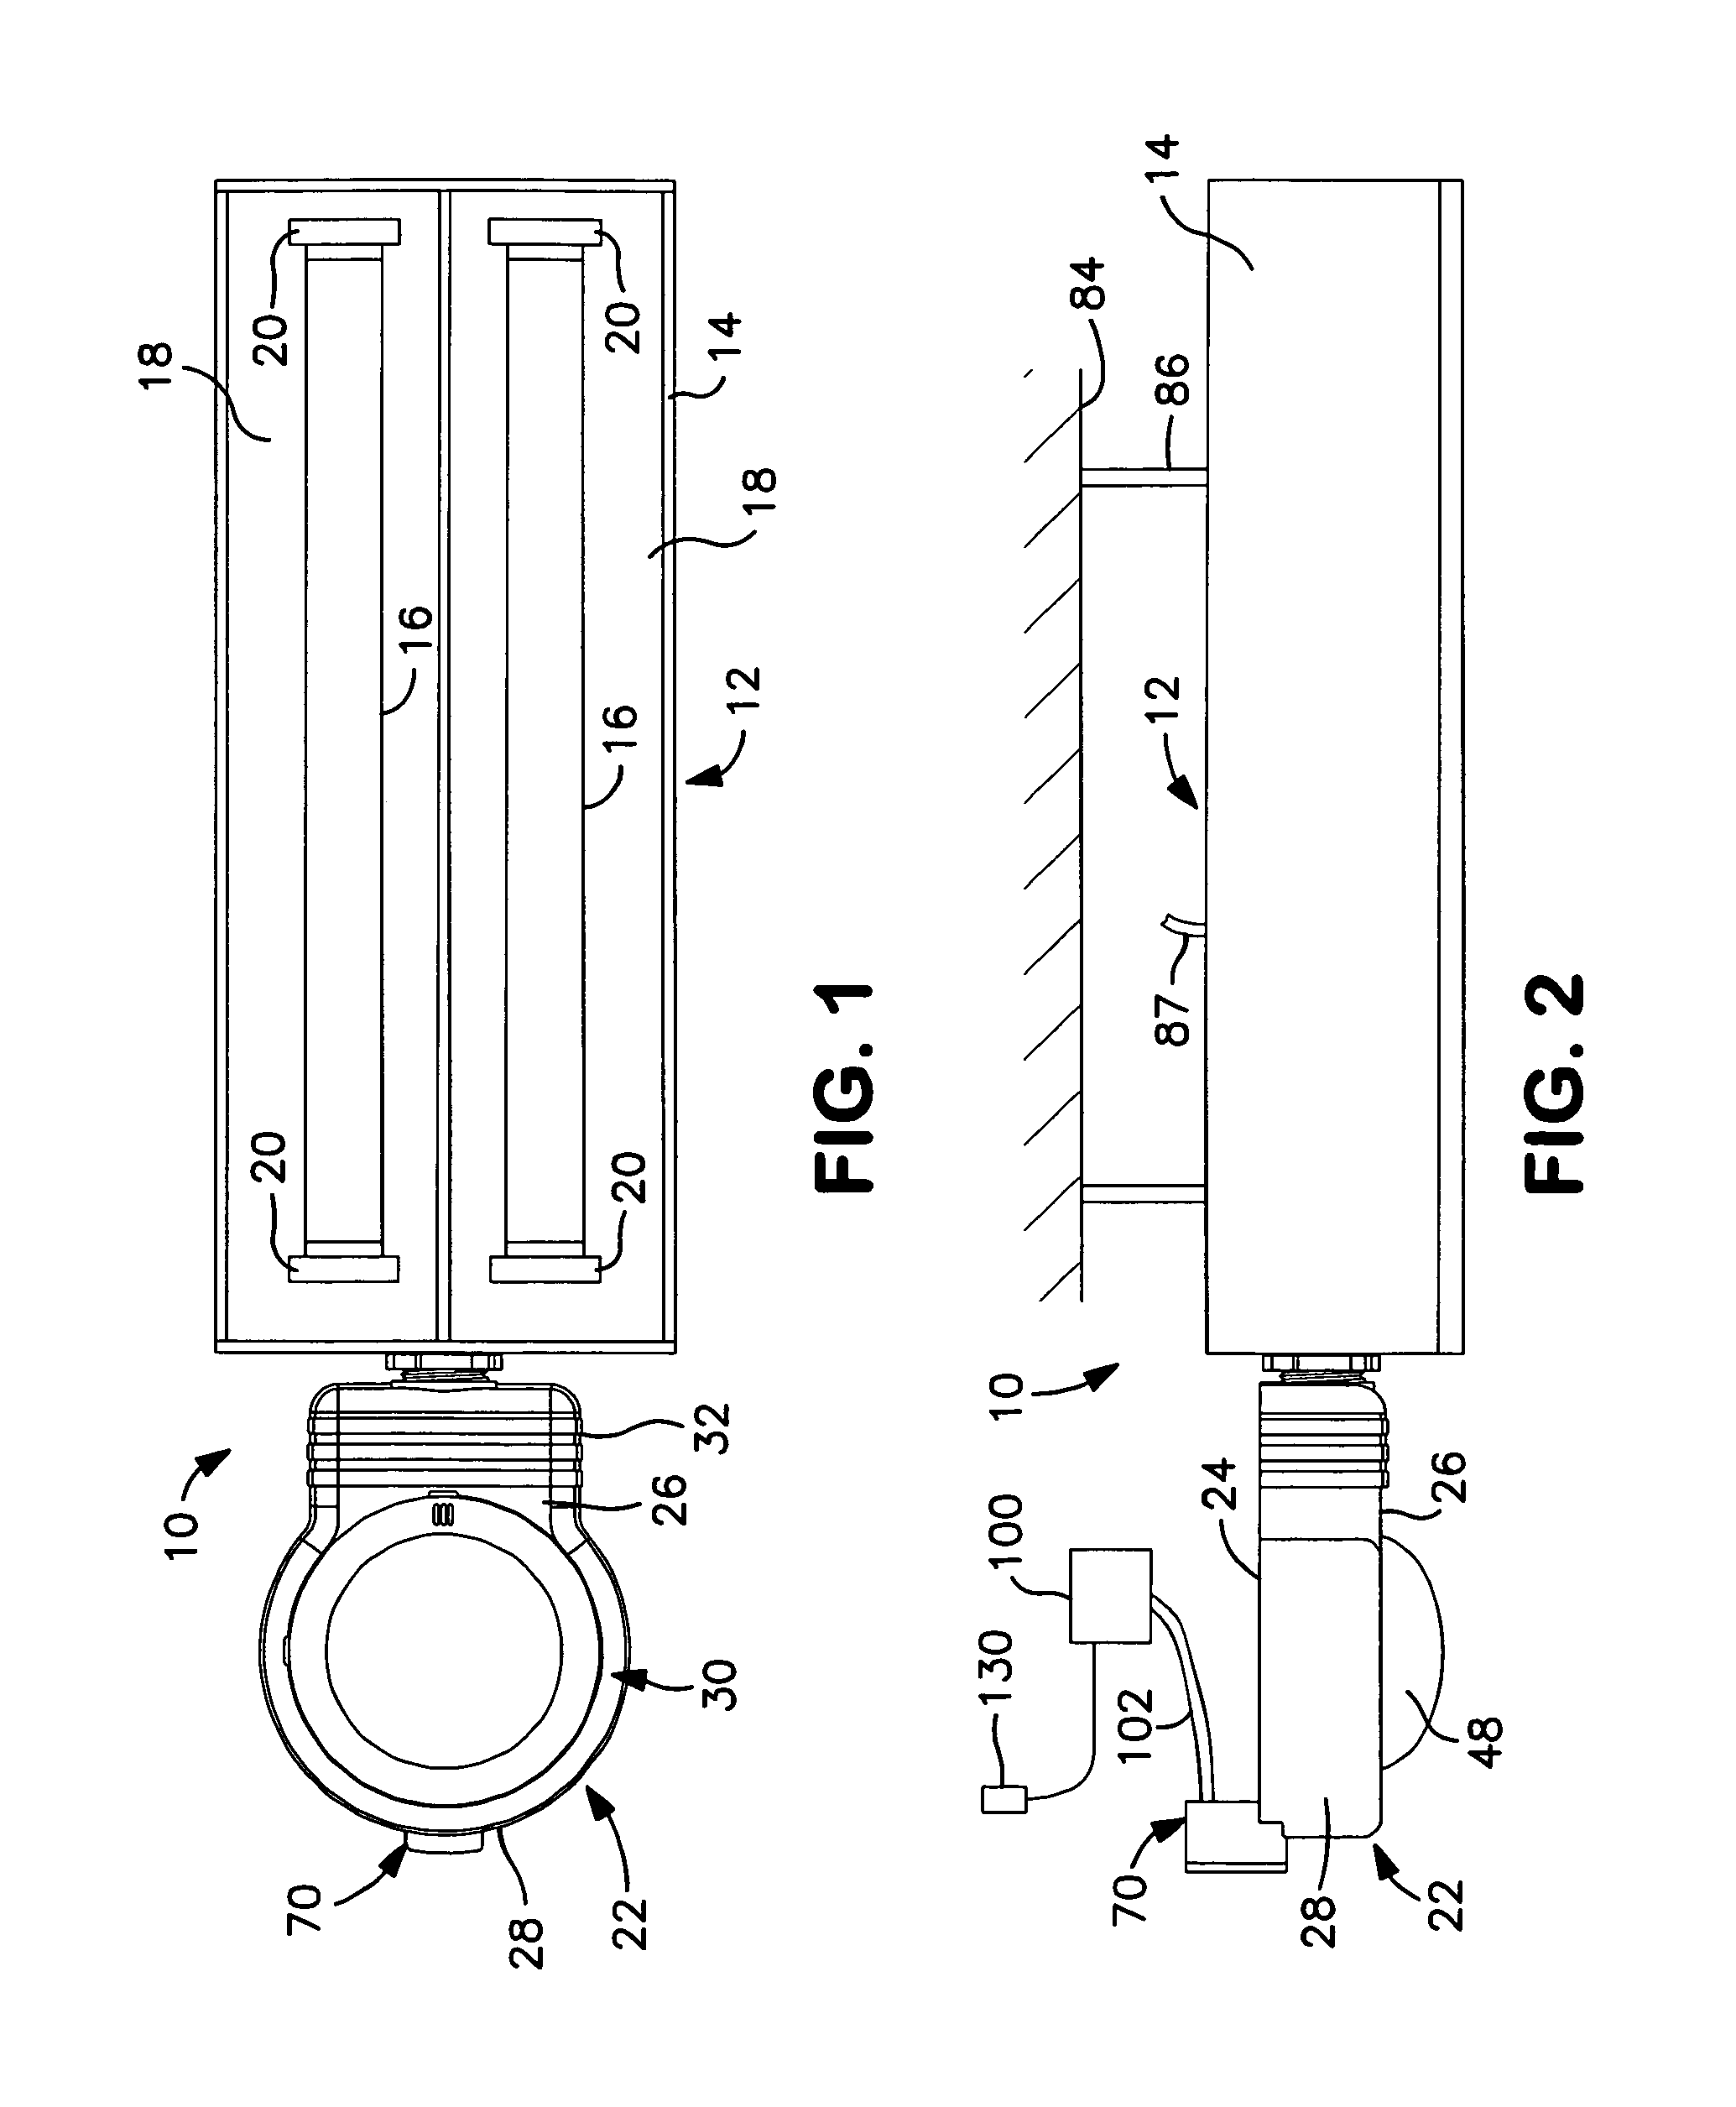 Occupancy sensor and override unit for photosensor-based control of load